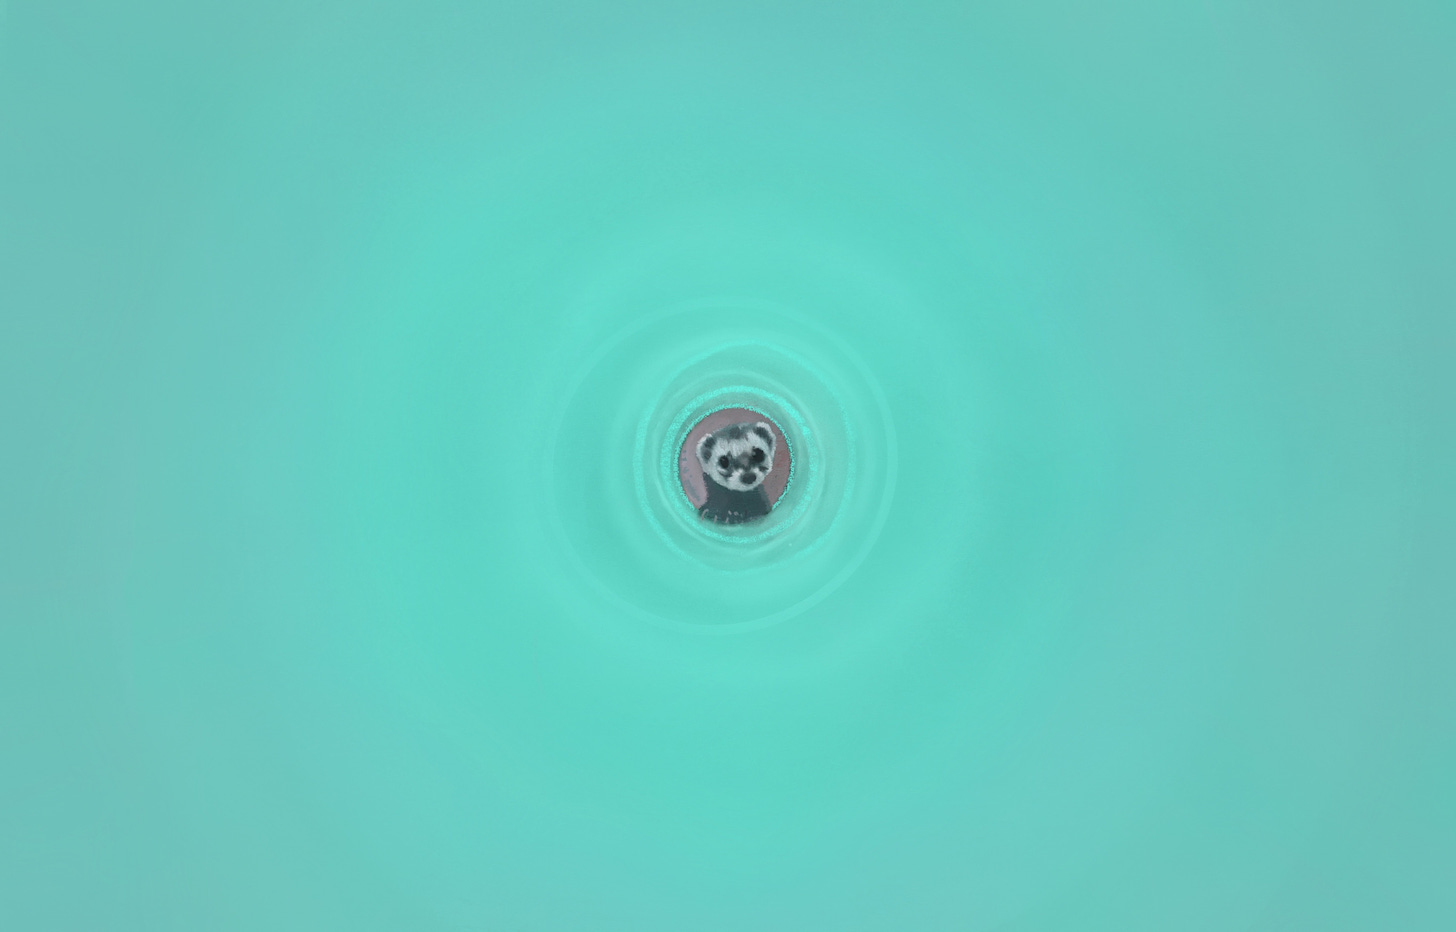 A colored pencil drawing of a tiny ferret seemingly viewed along the telescope-like length of a vast turquoise-green tunnel.